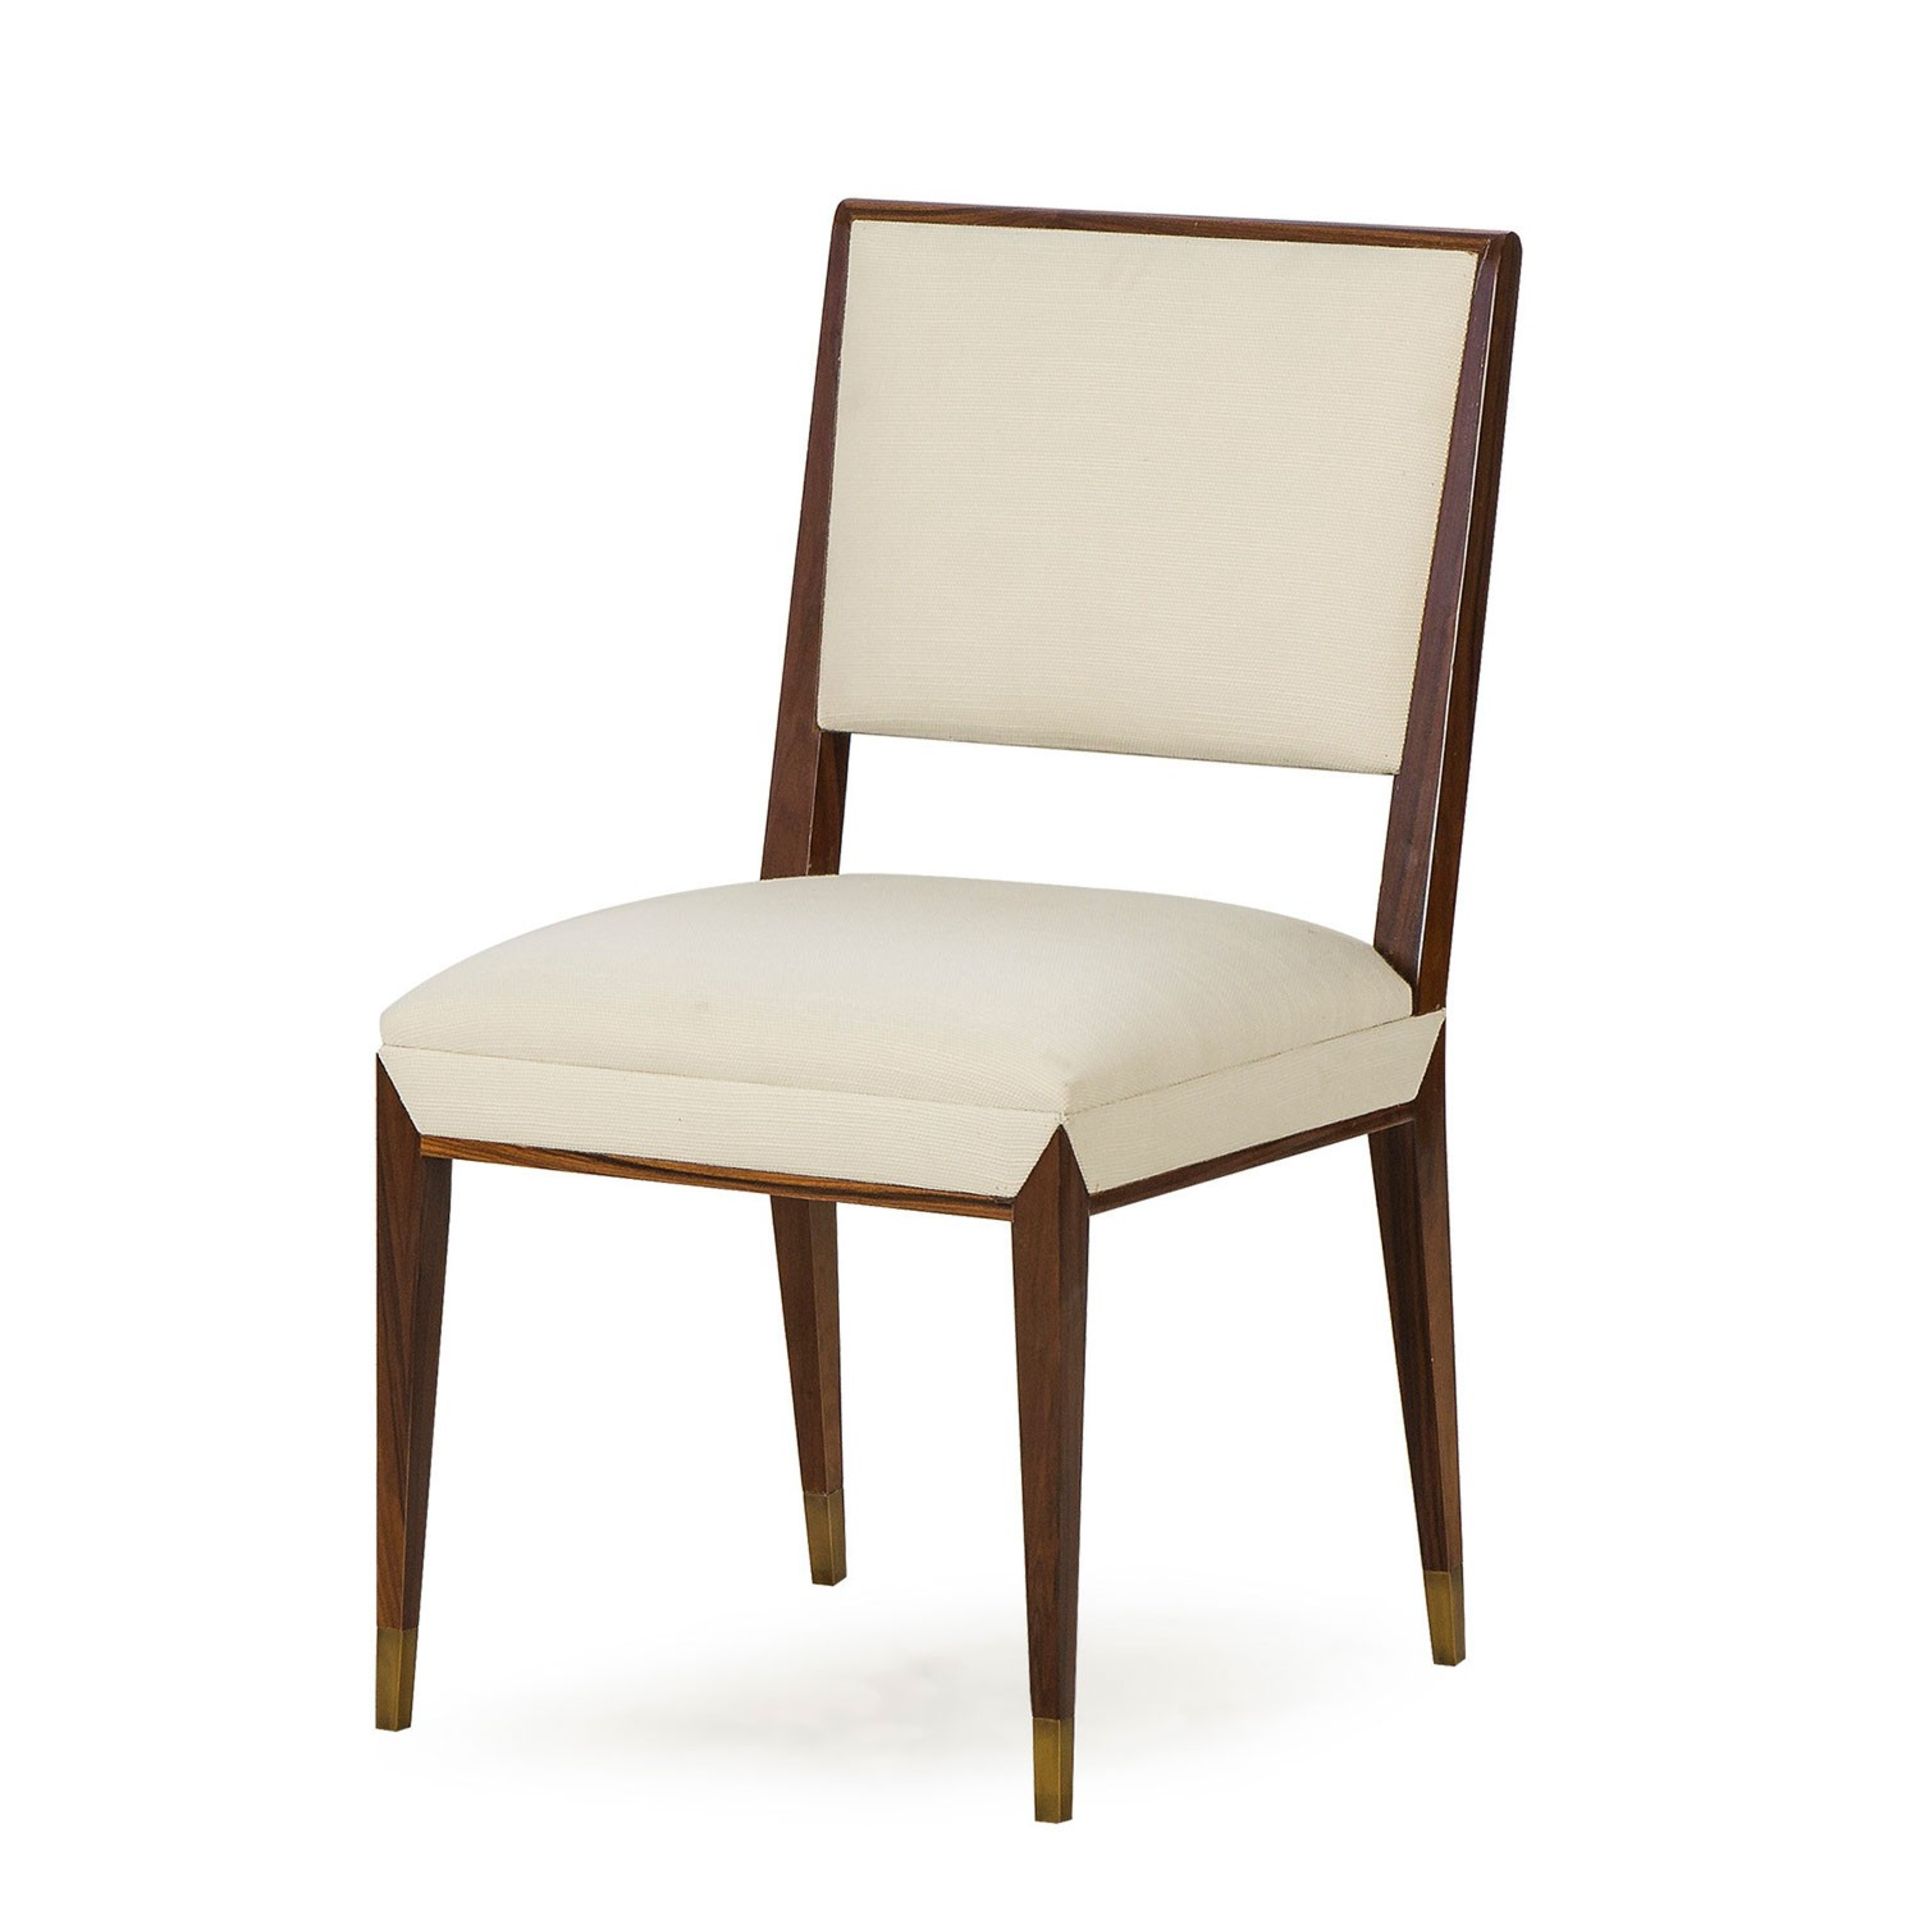 Reform Side Chair Rosewood / Misha Cream An Elegant, Upholstered Chair, Crafted From A Beech Wood